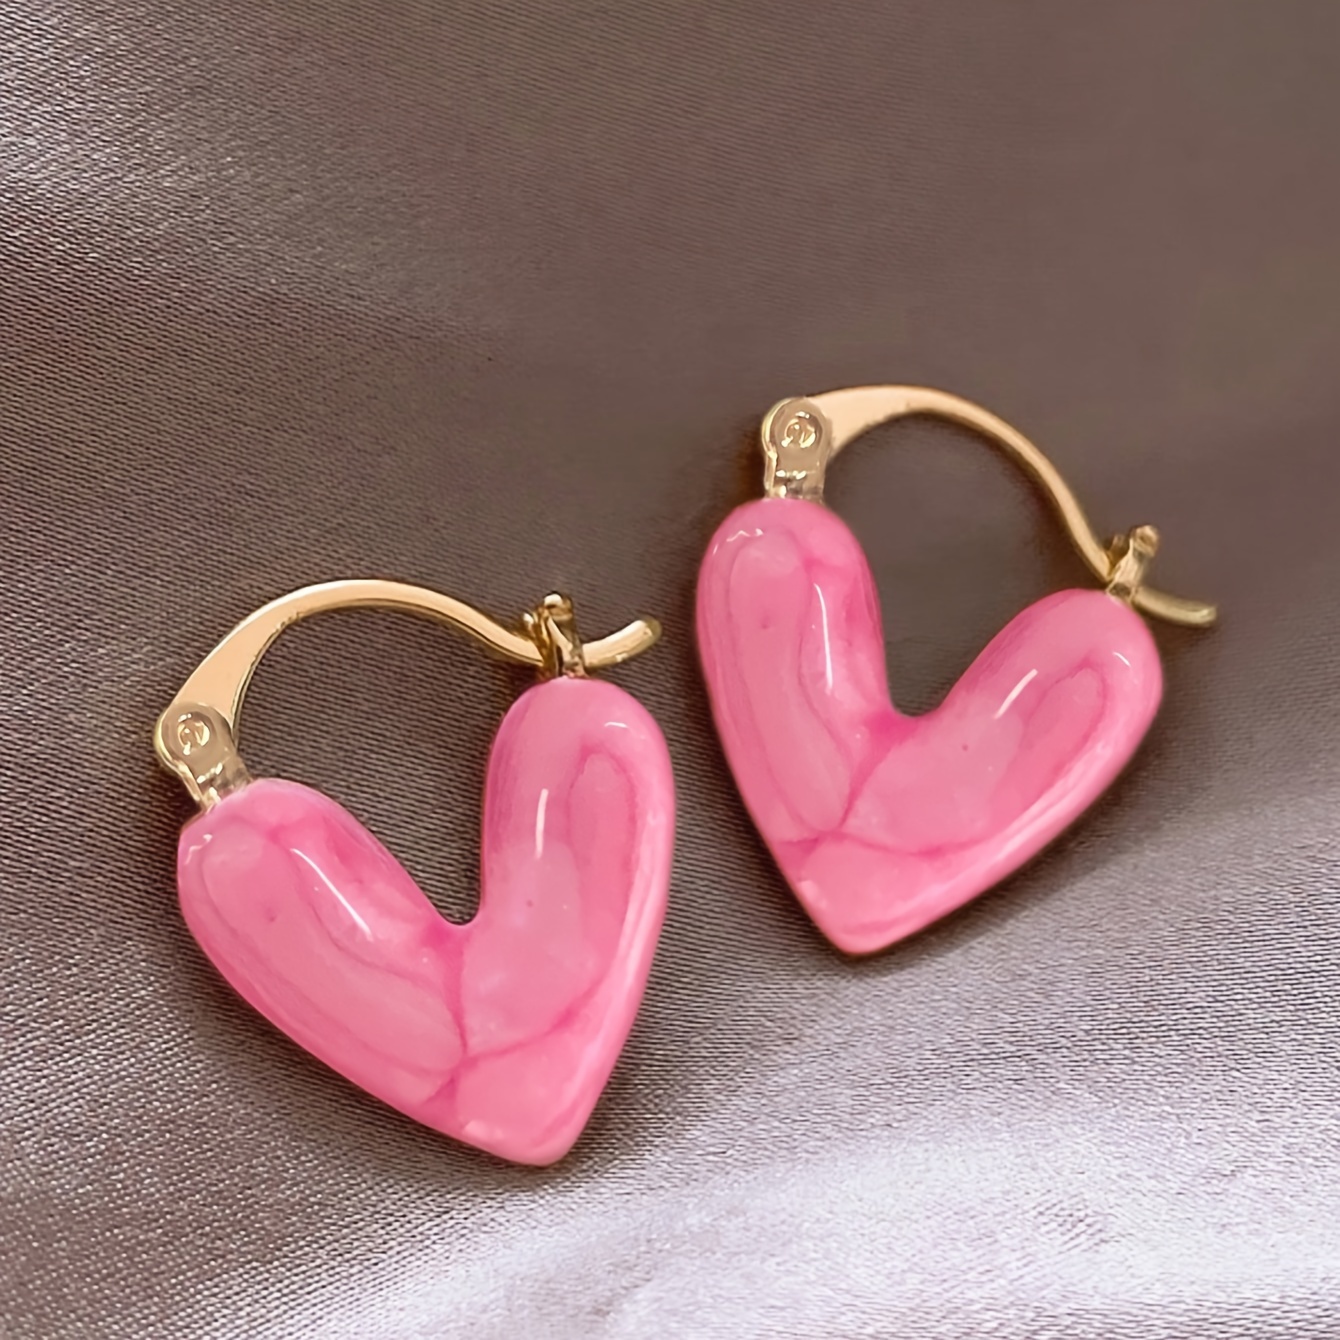 

A Pair Of Heart Shape Earrings For Valentine's Day, Retro Simple Ear Jewelry Decor For Daily Wear Dating